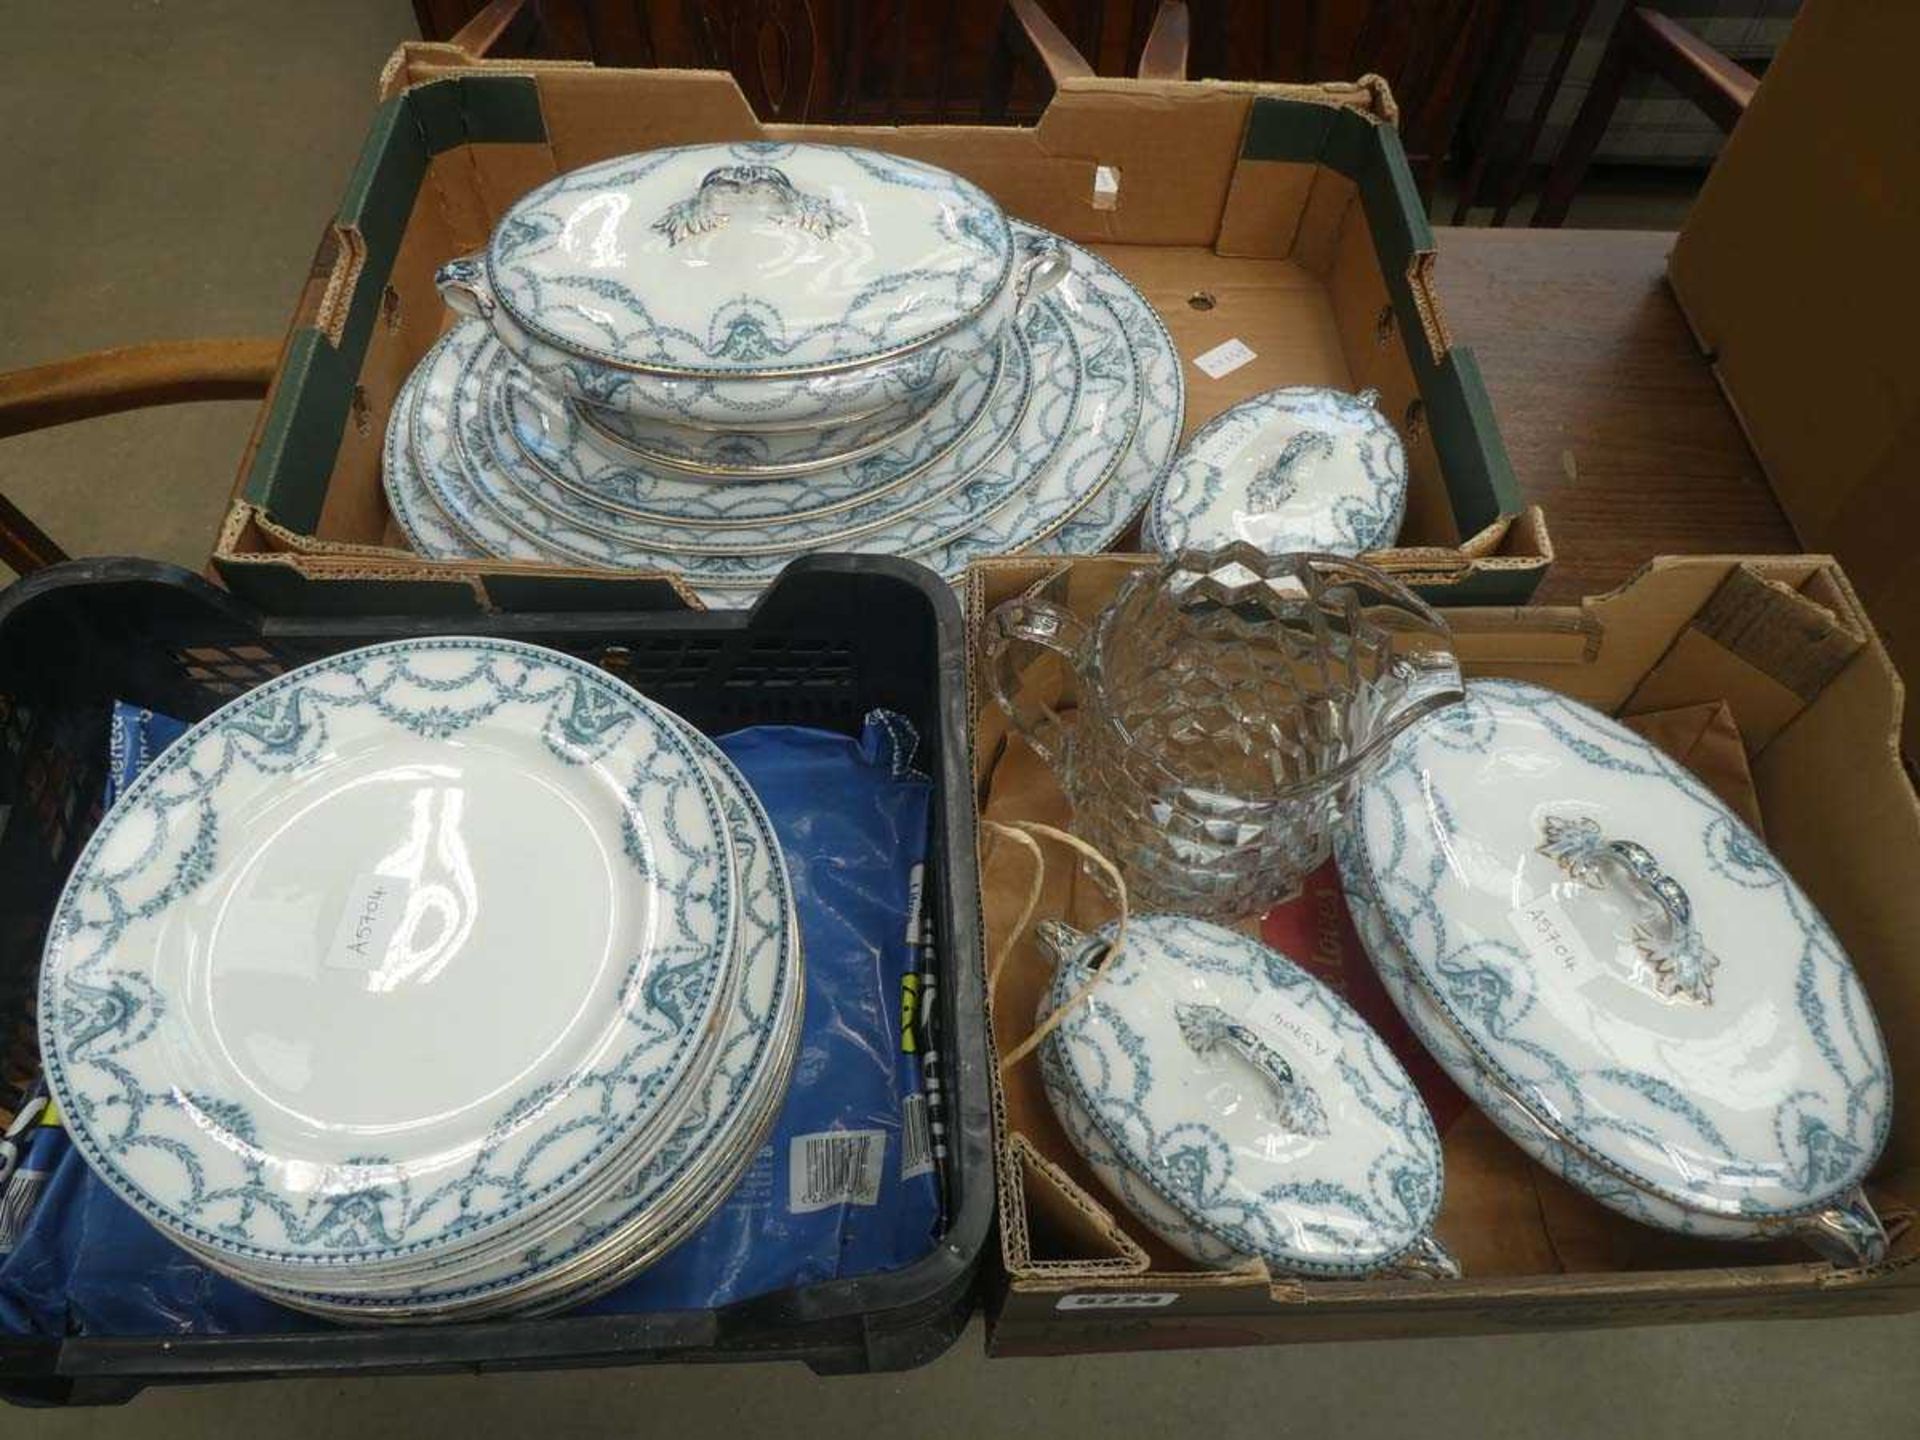 Quantity of Bridgewood and Sons laurel patterned crockery plus a glass water jug